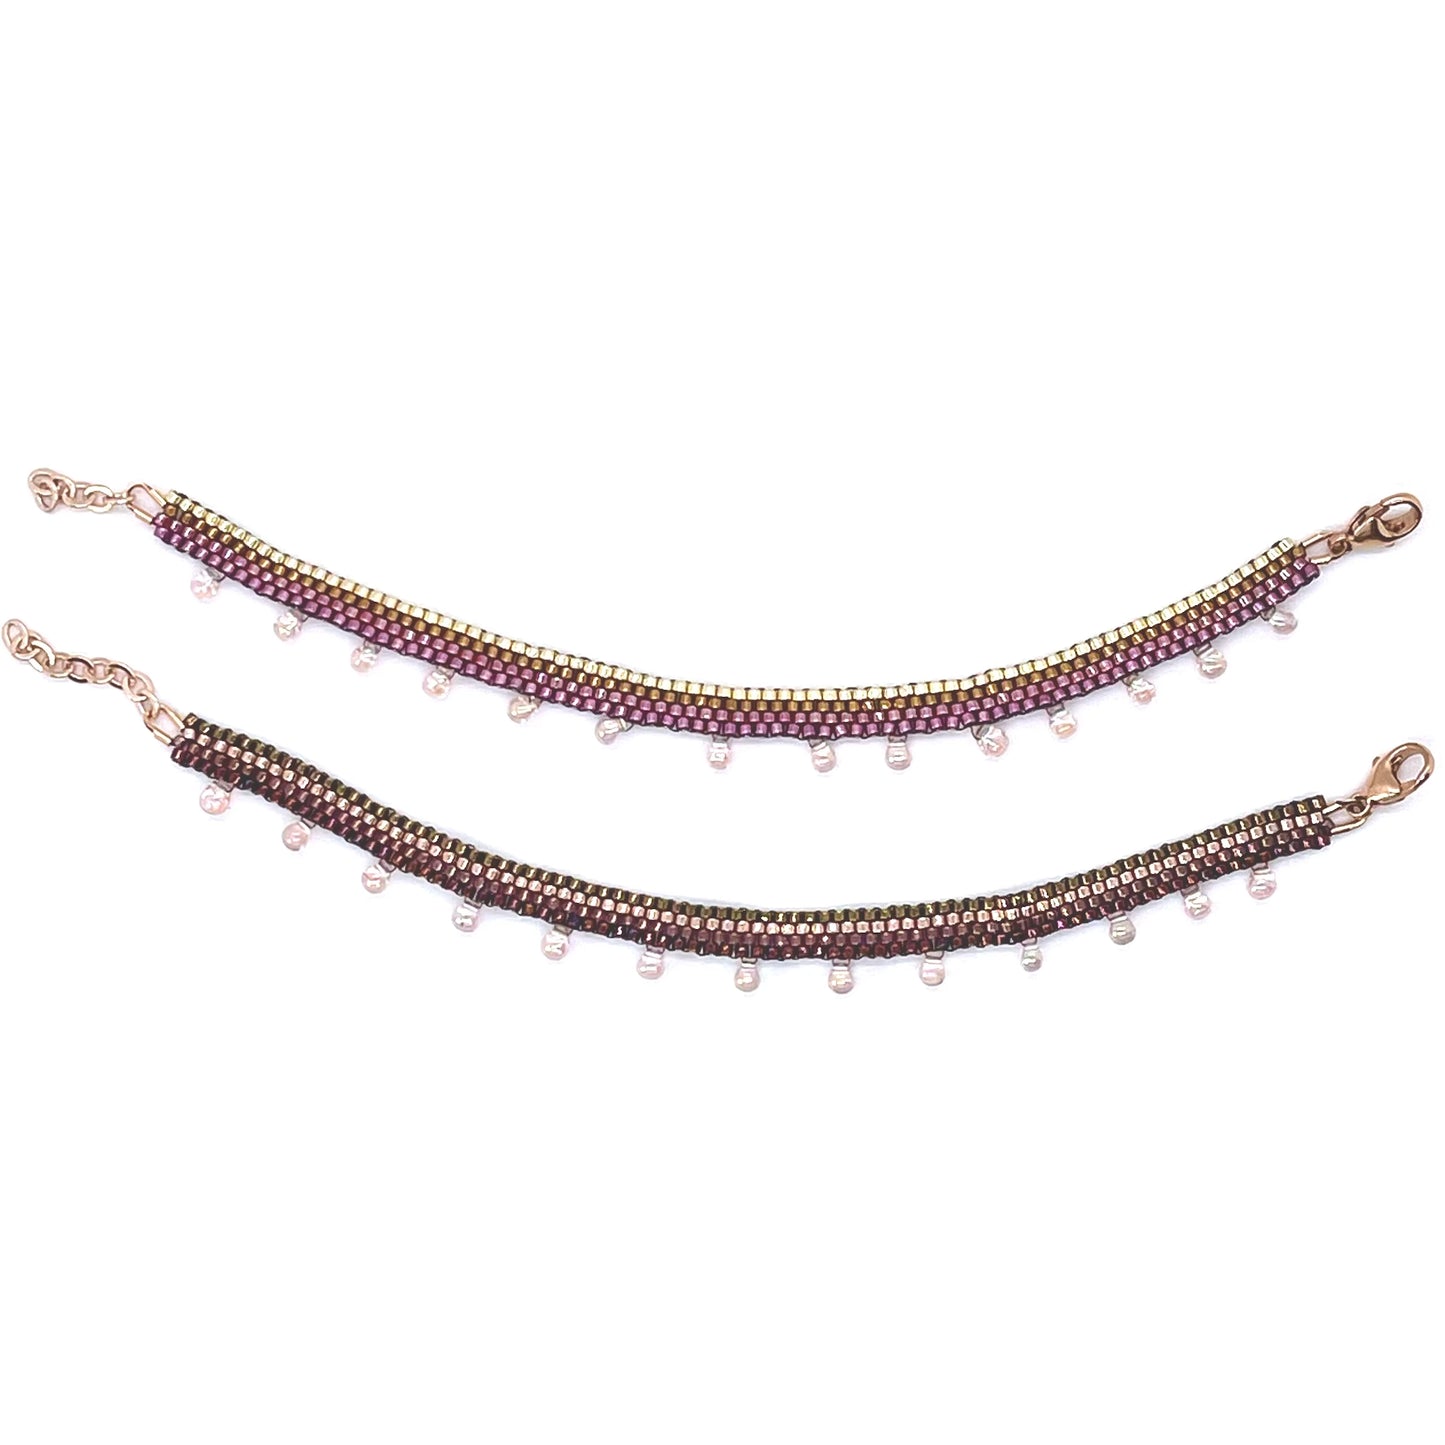 Cystal drop beaded ankle bracelets with pink, magenta, gold and bronze tone metallic seed beads. Handmade with peyote stitch.